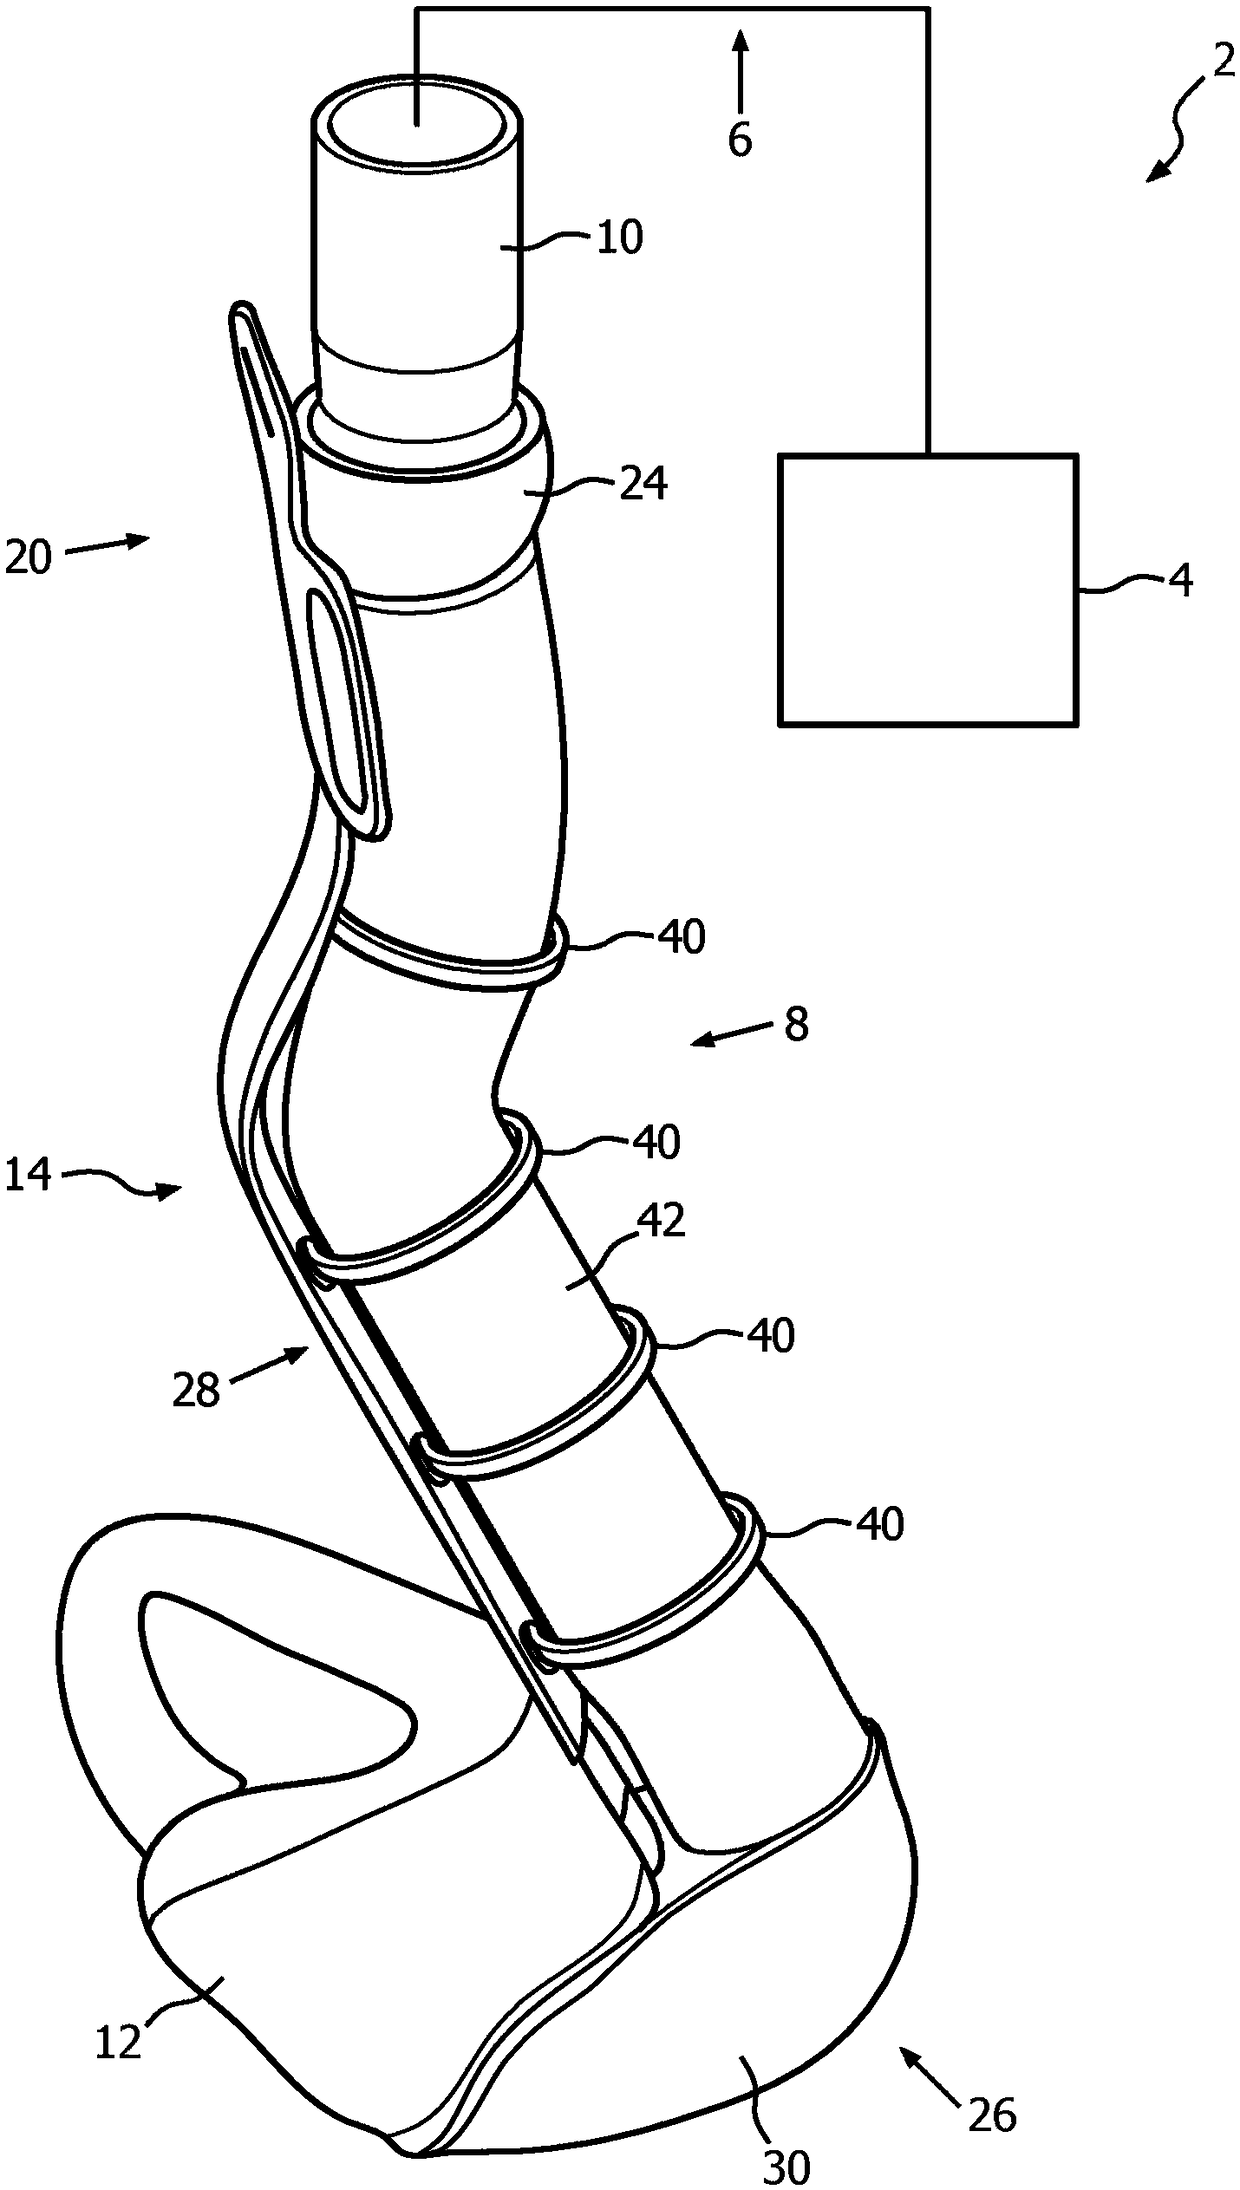 Custom contoured frame for patient interface device